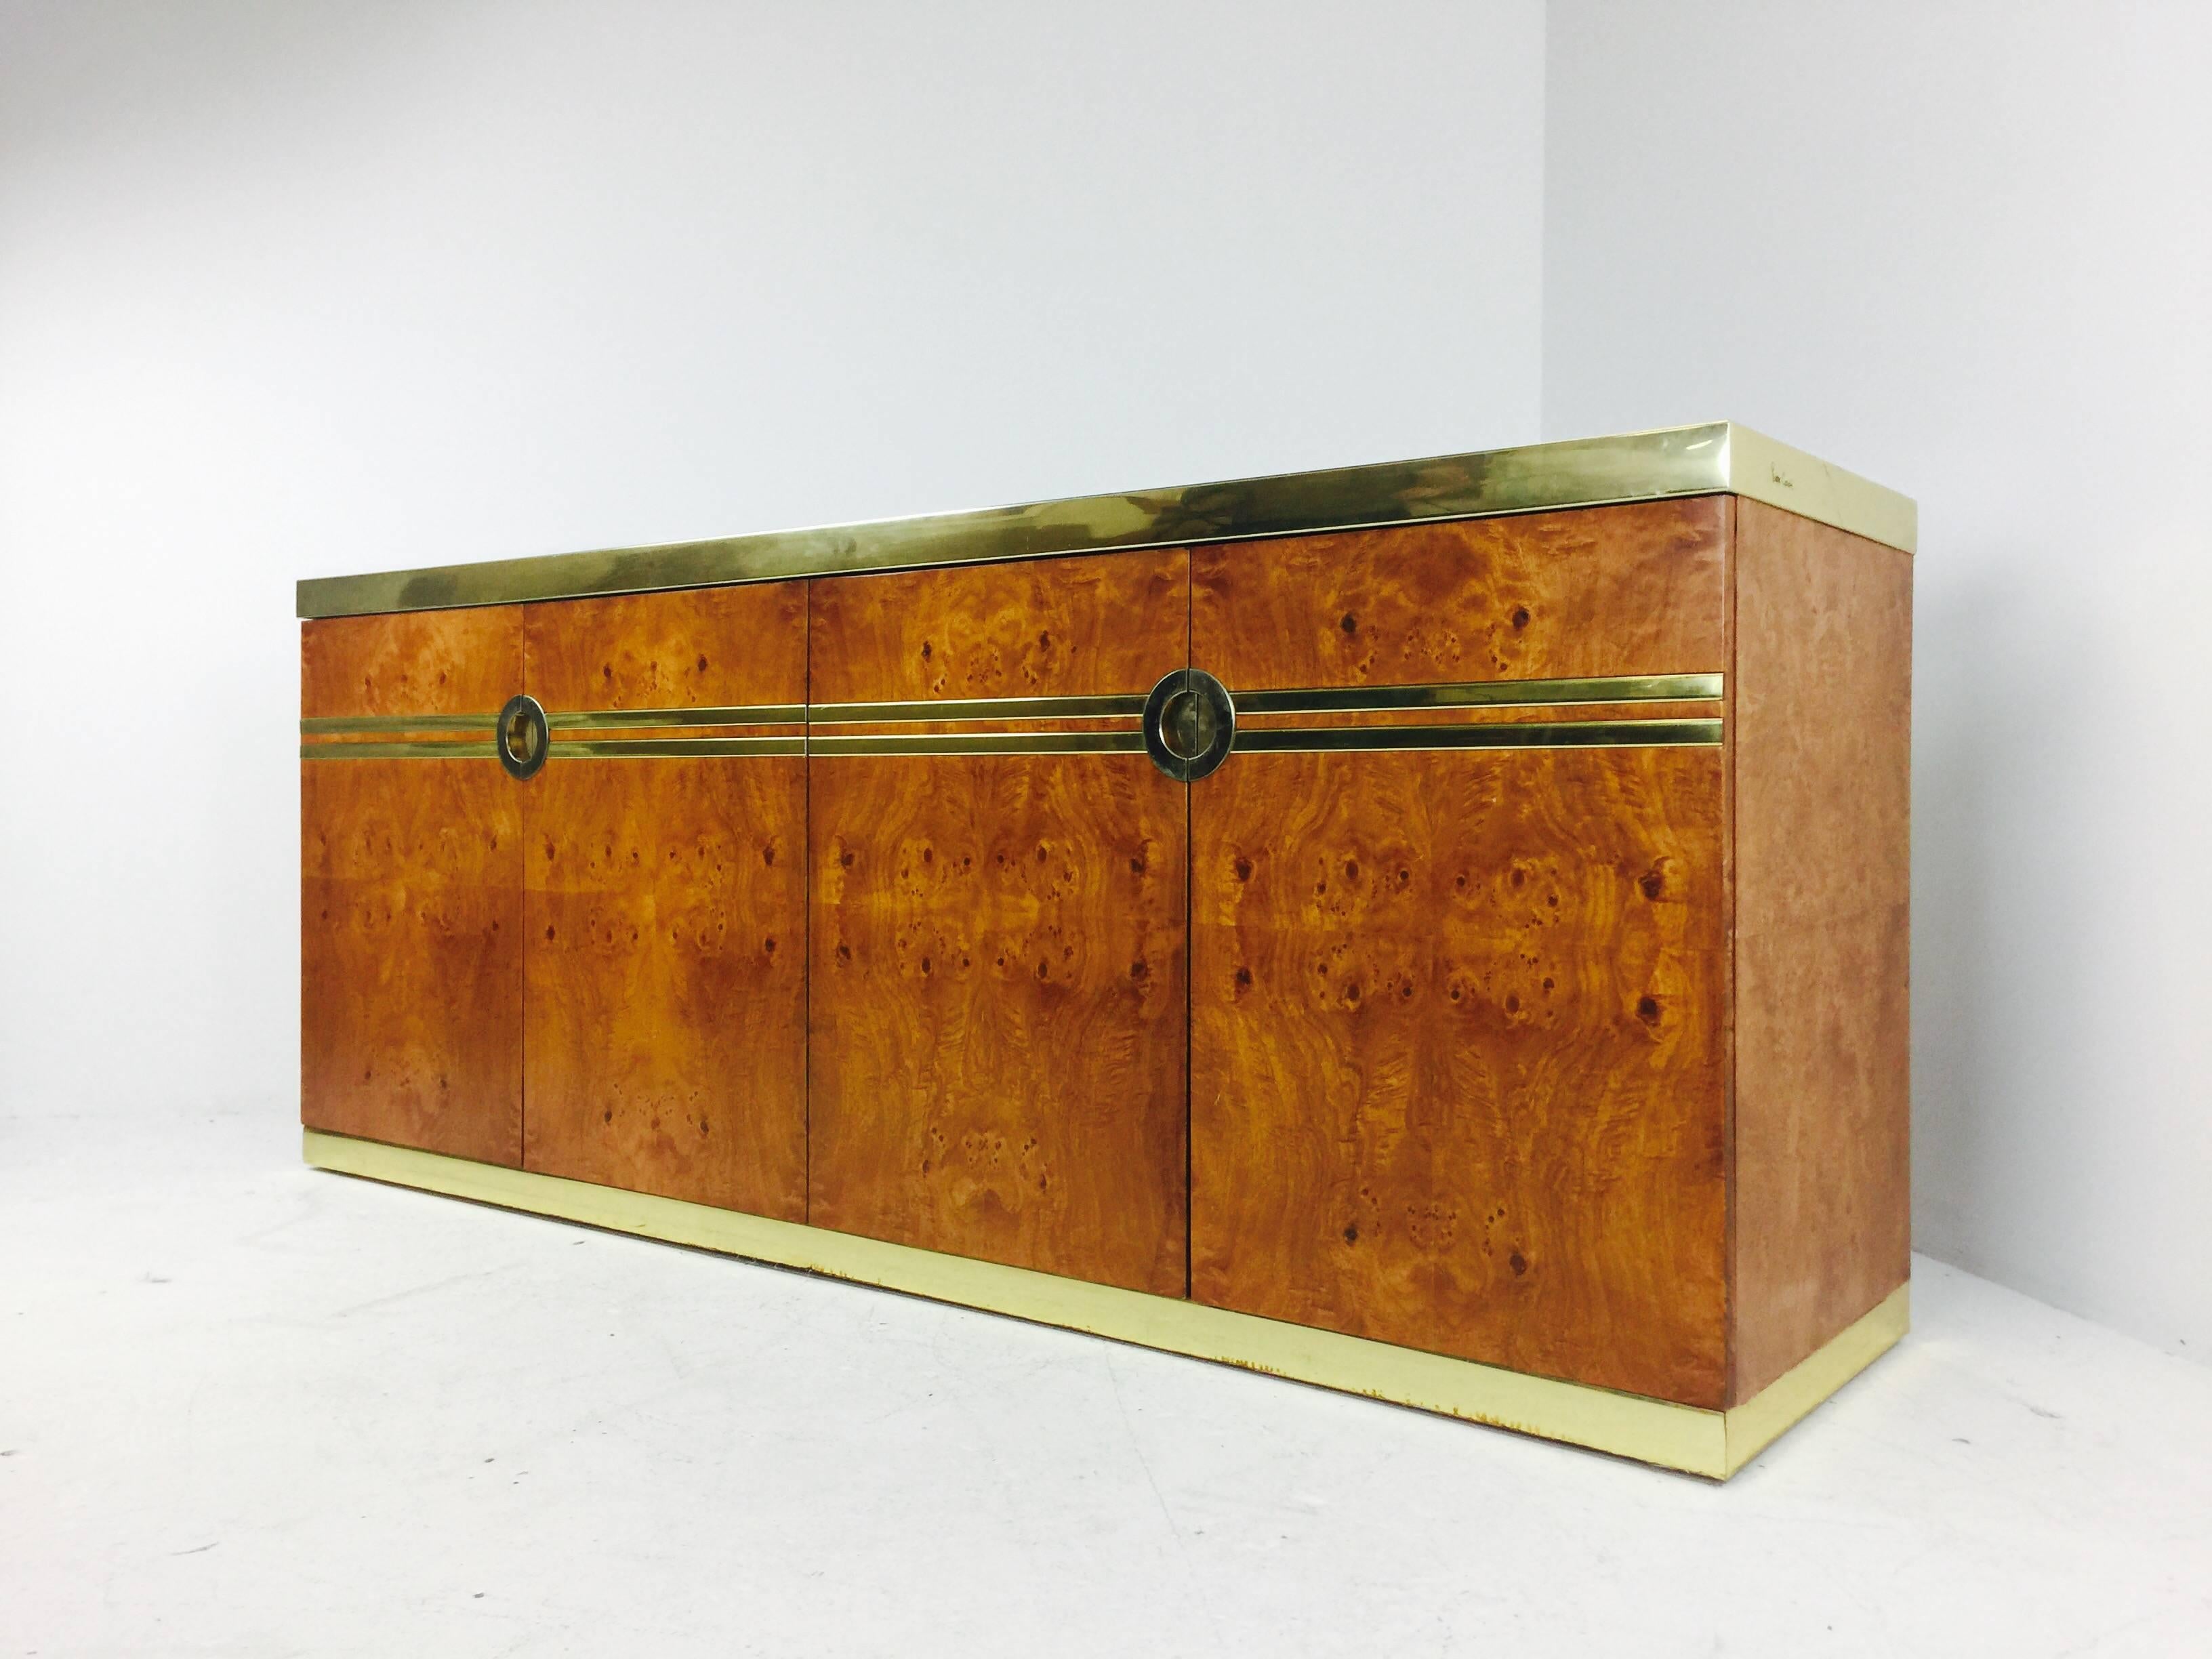 Burl and brass credenza by Pierre Cardin. Does need refinishing,
circa 1970s.

Dimensions: 74" W x 19" D x 30.25" T.